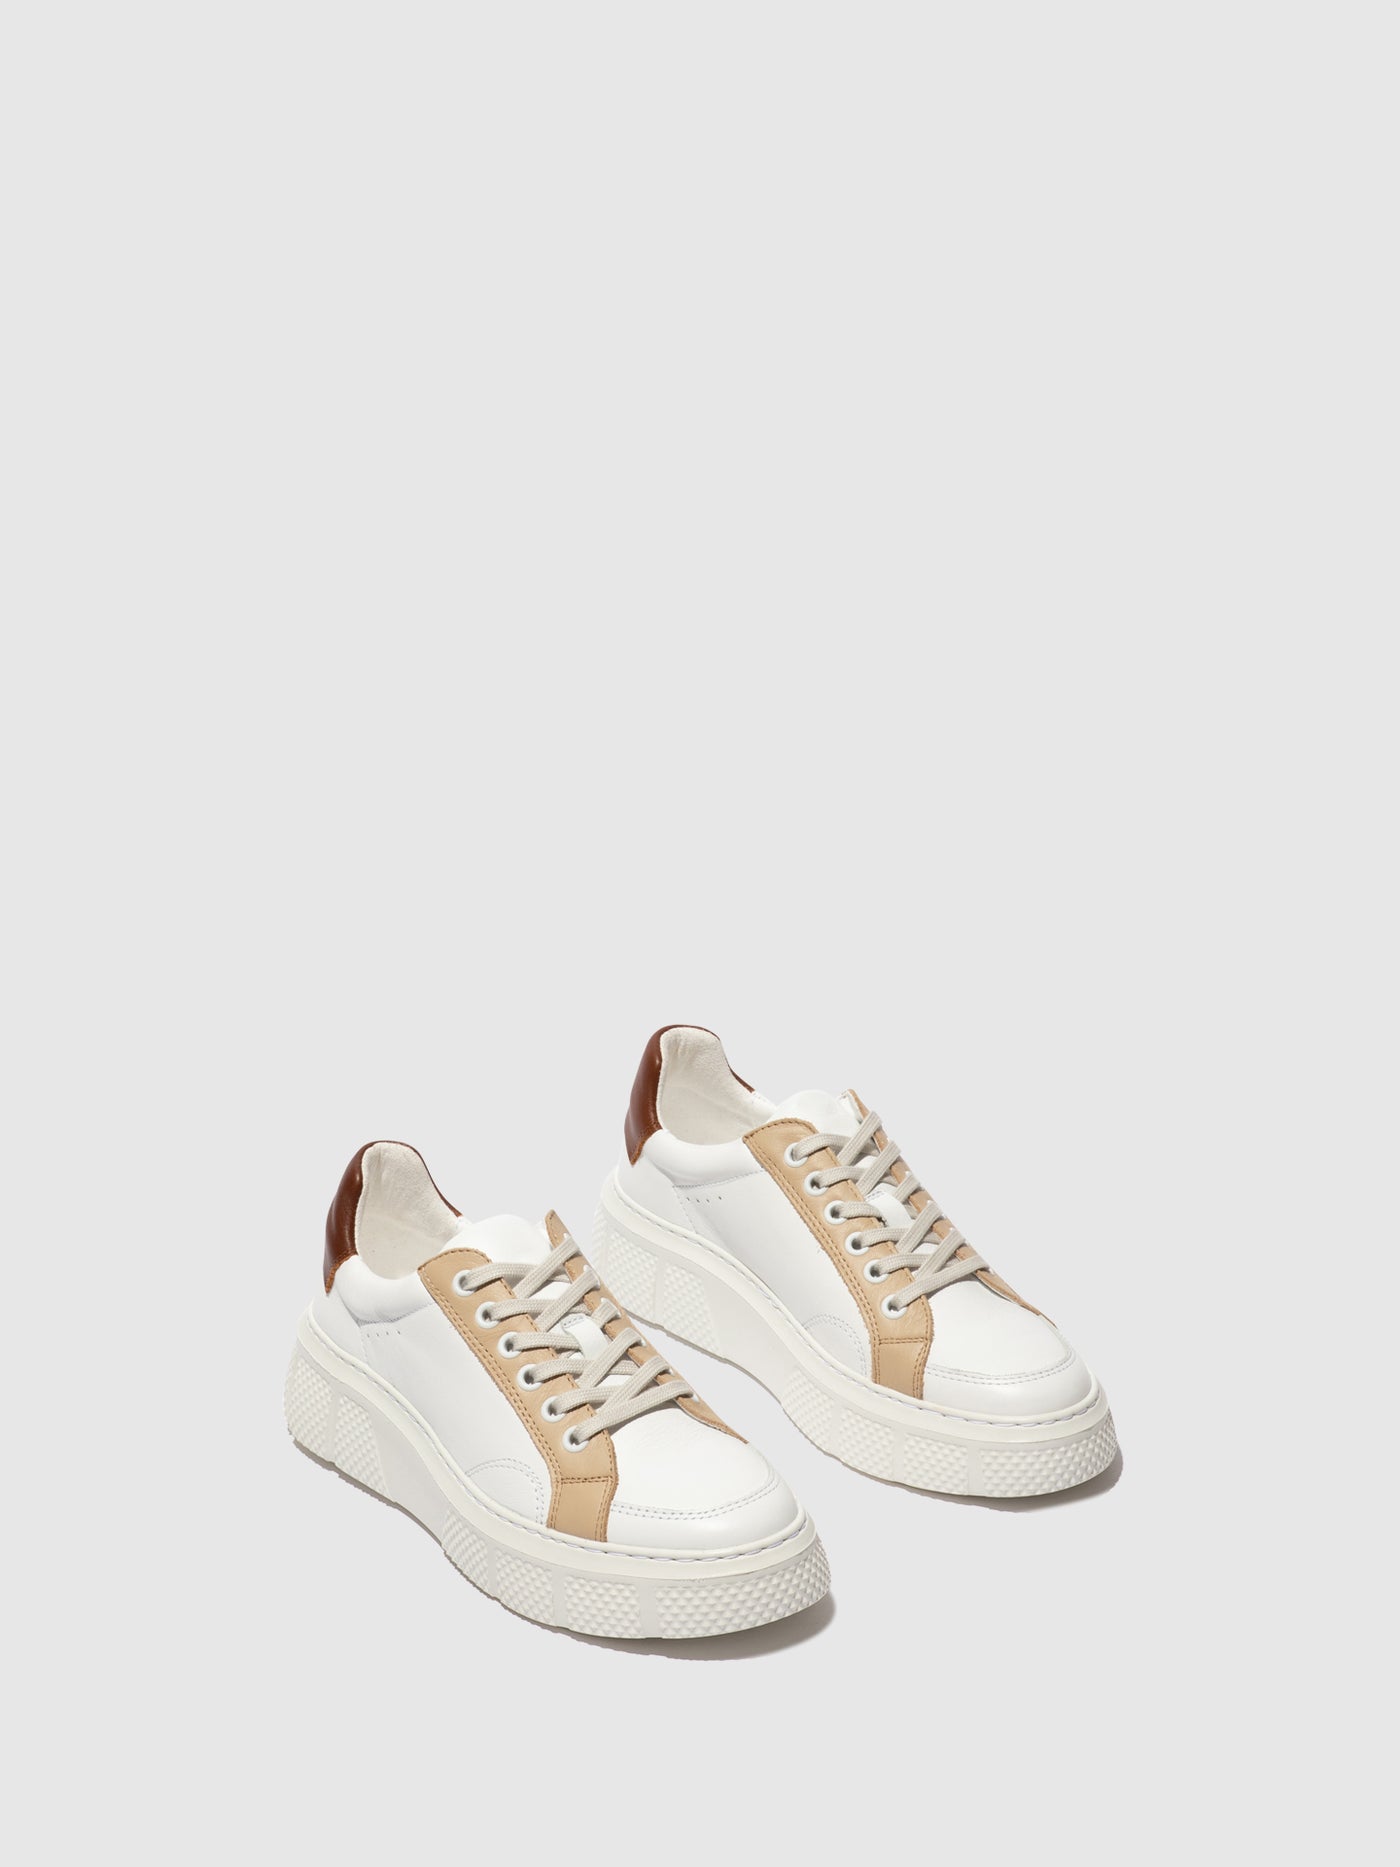 Lace-up Trainers EMMY510FLY WHITE/BEIGE/COGNAC